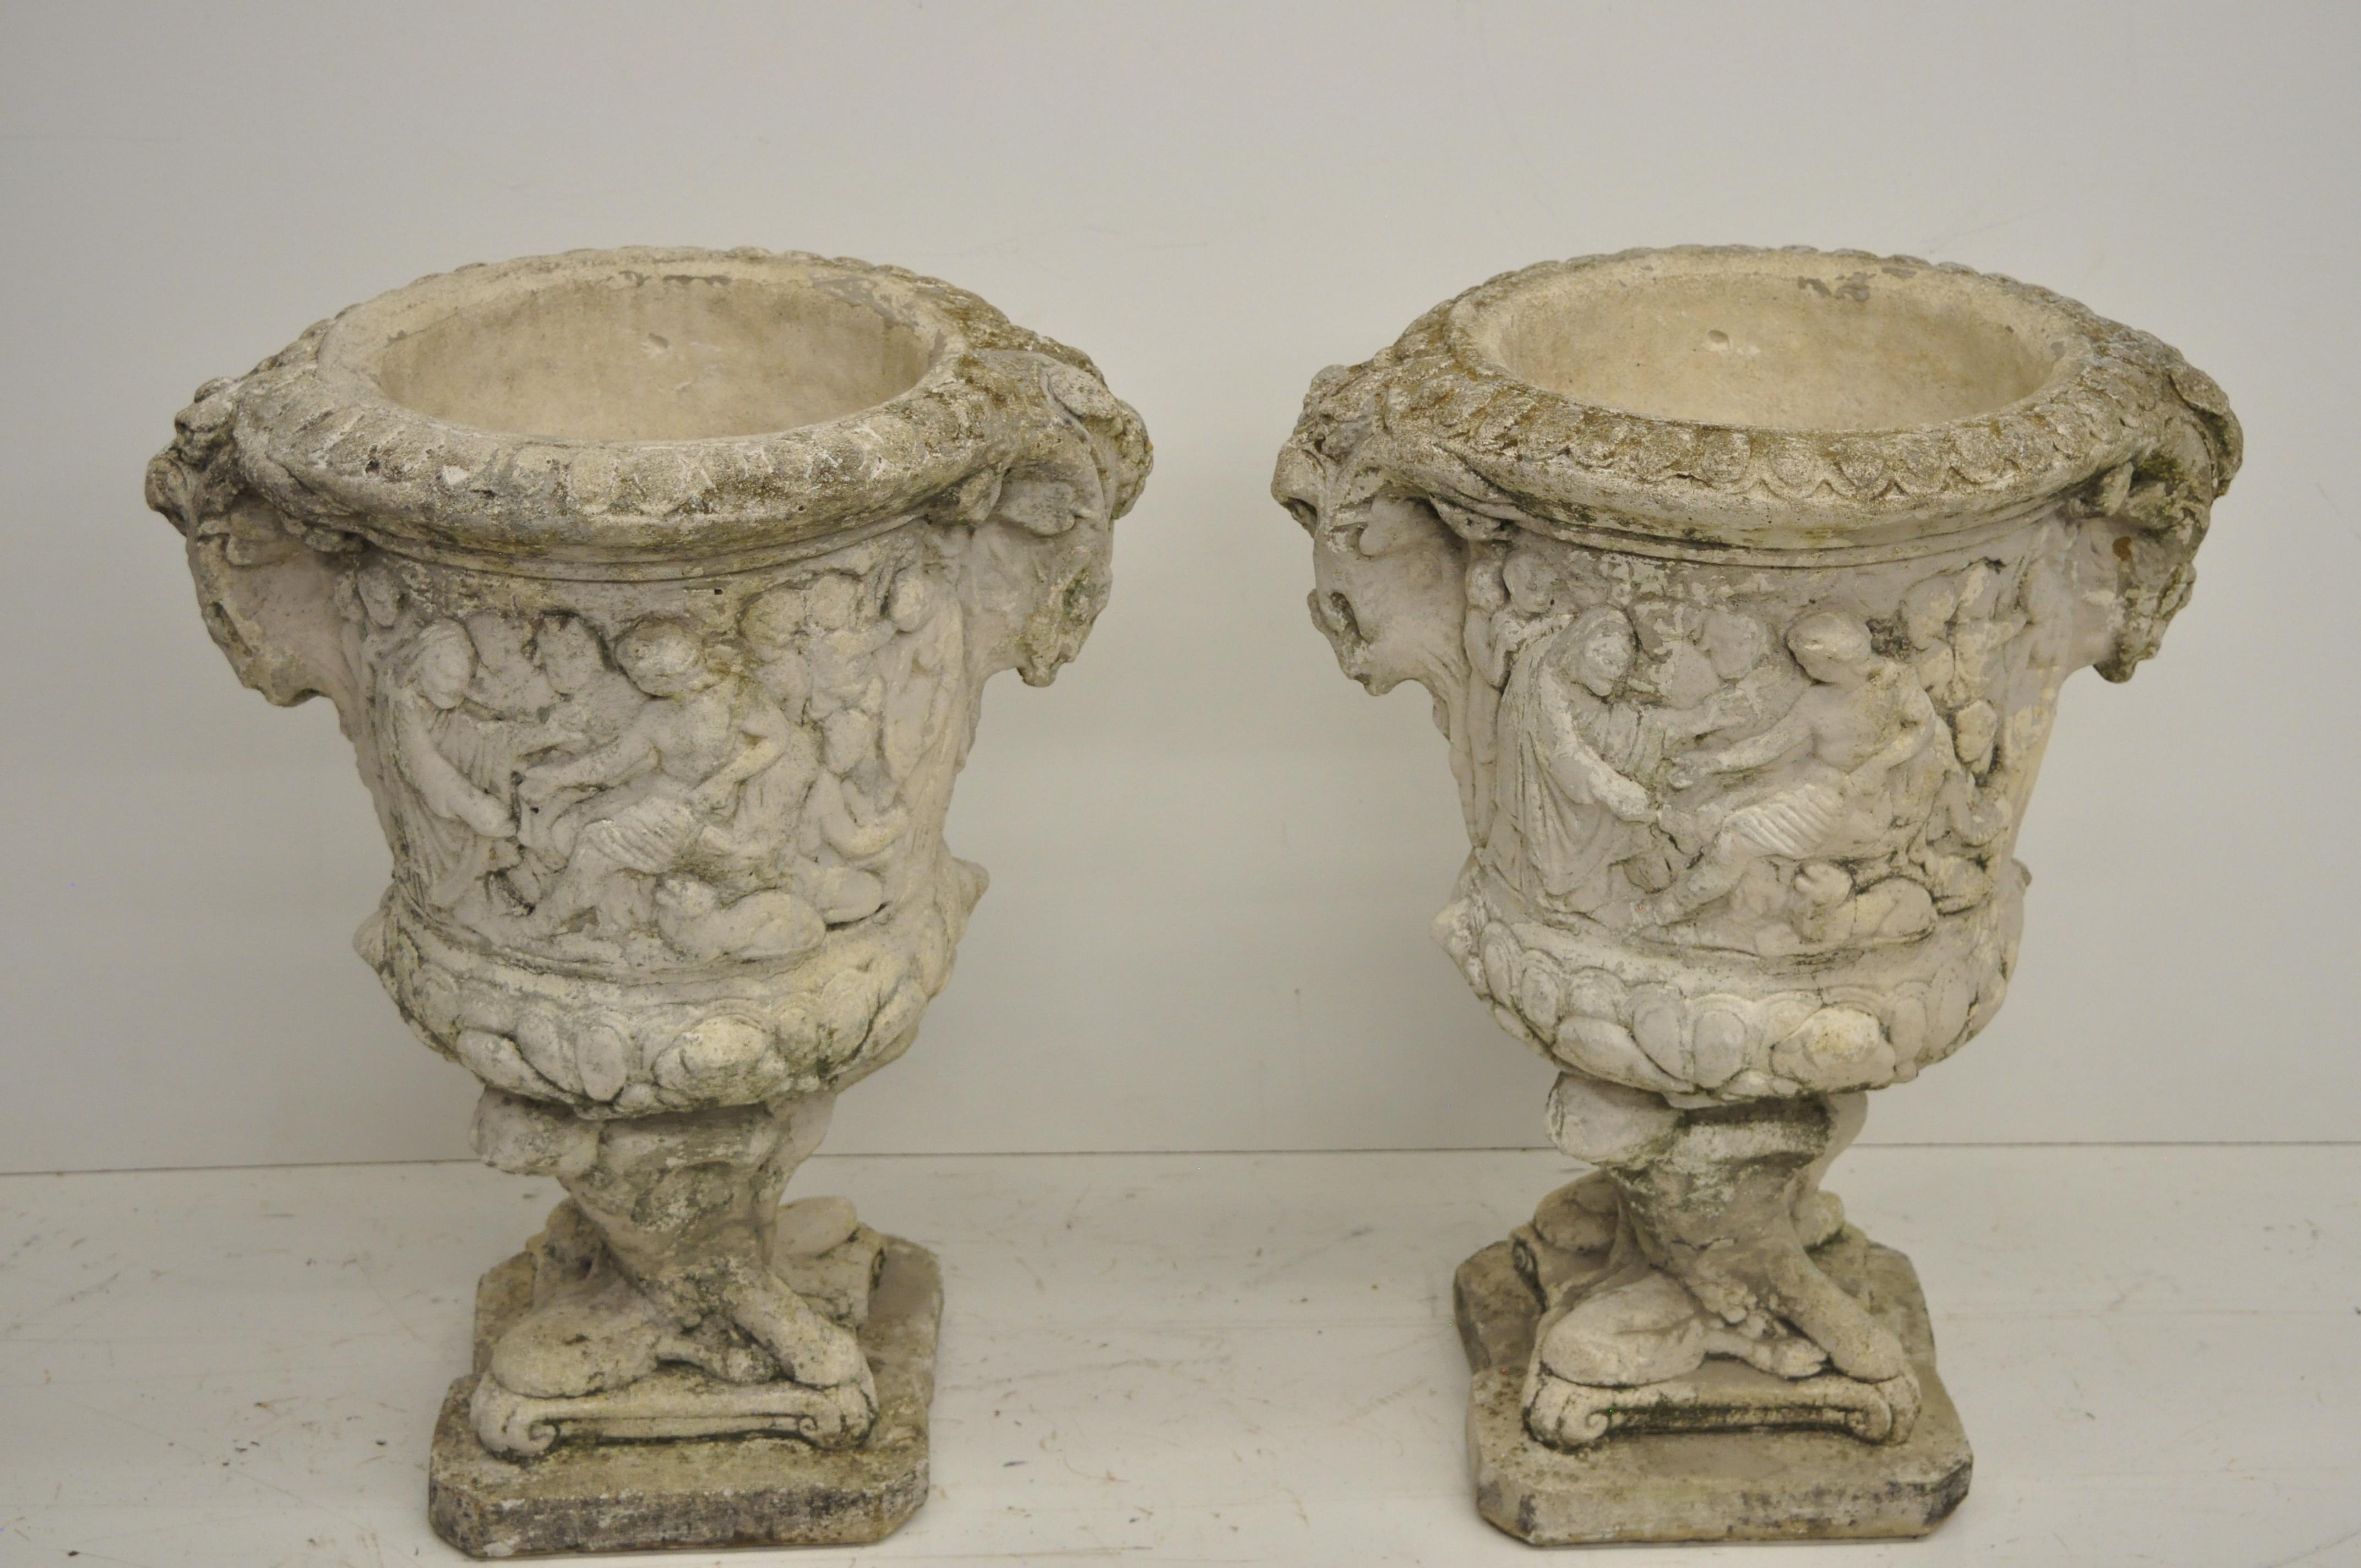 Antique pair of urn form concrete figural planters with Greek Classical scenes. Item features different scenes on front and rear, various male and female relief figures, authentic weathered patina, approximate 100 lbs. each, very impressive antique